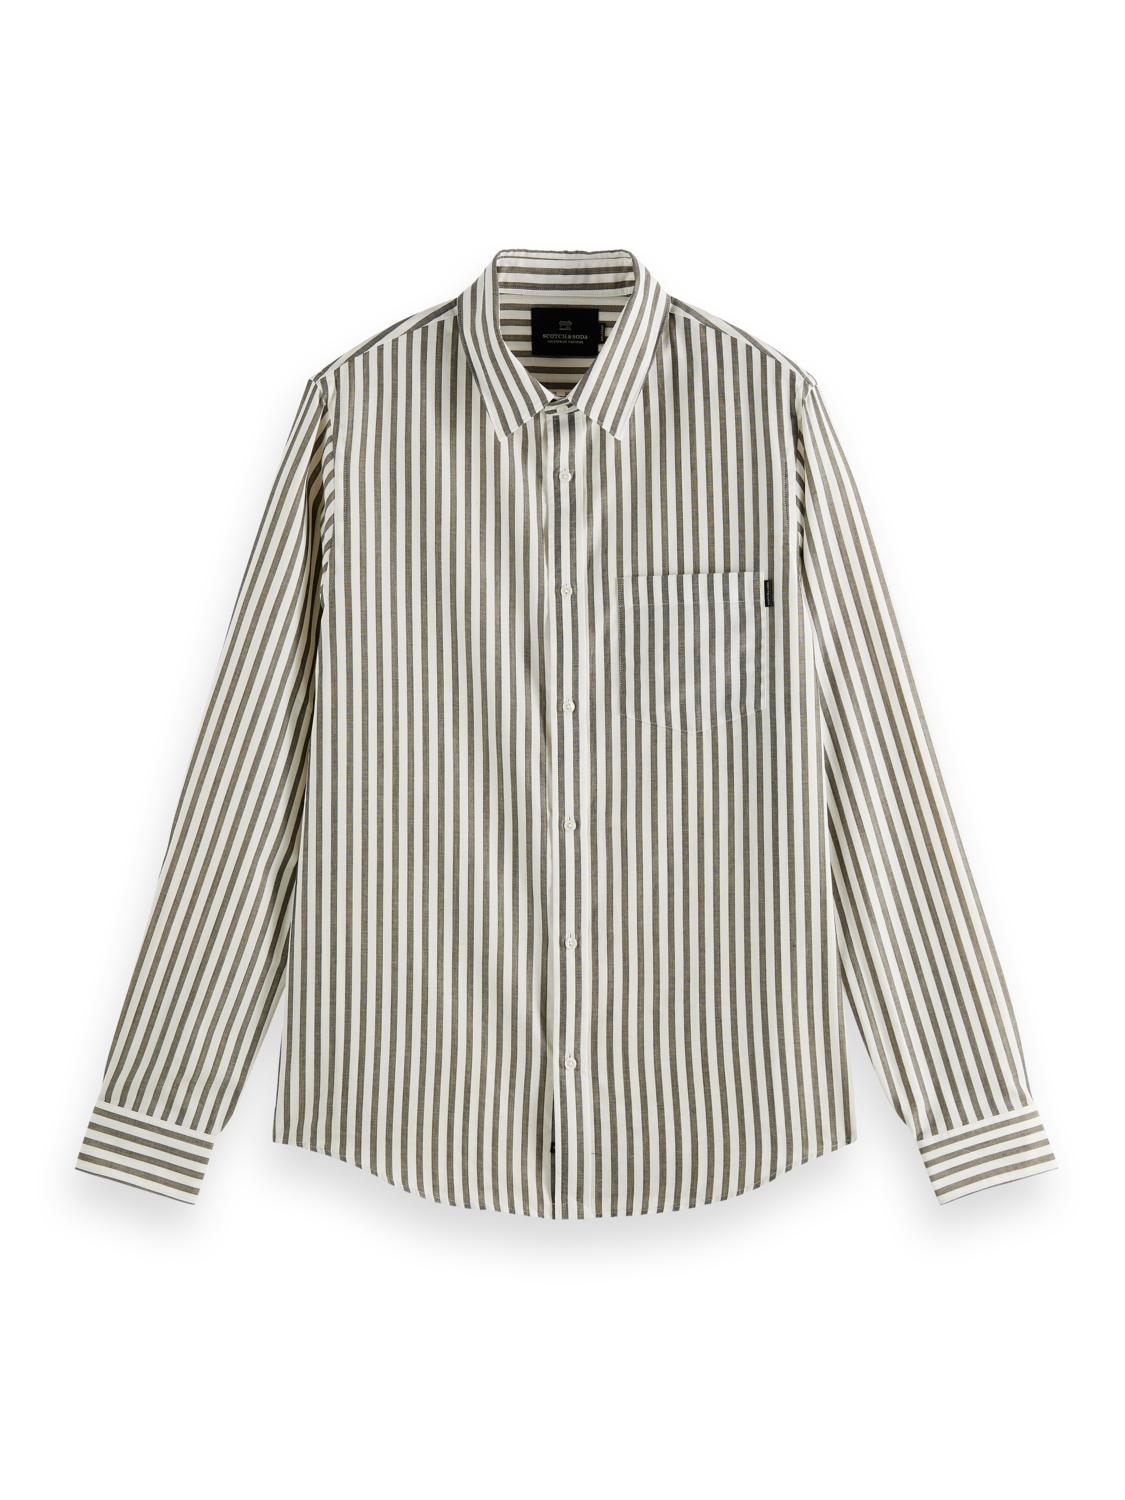 Scotch & Soda RELAXED FIT- Shirt in yarn-dyed pattern - Brave